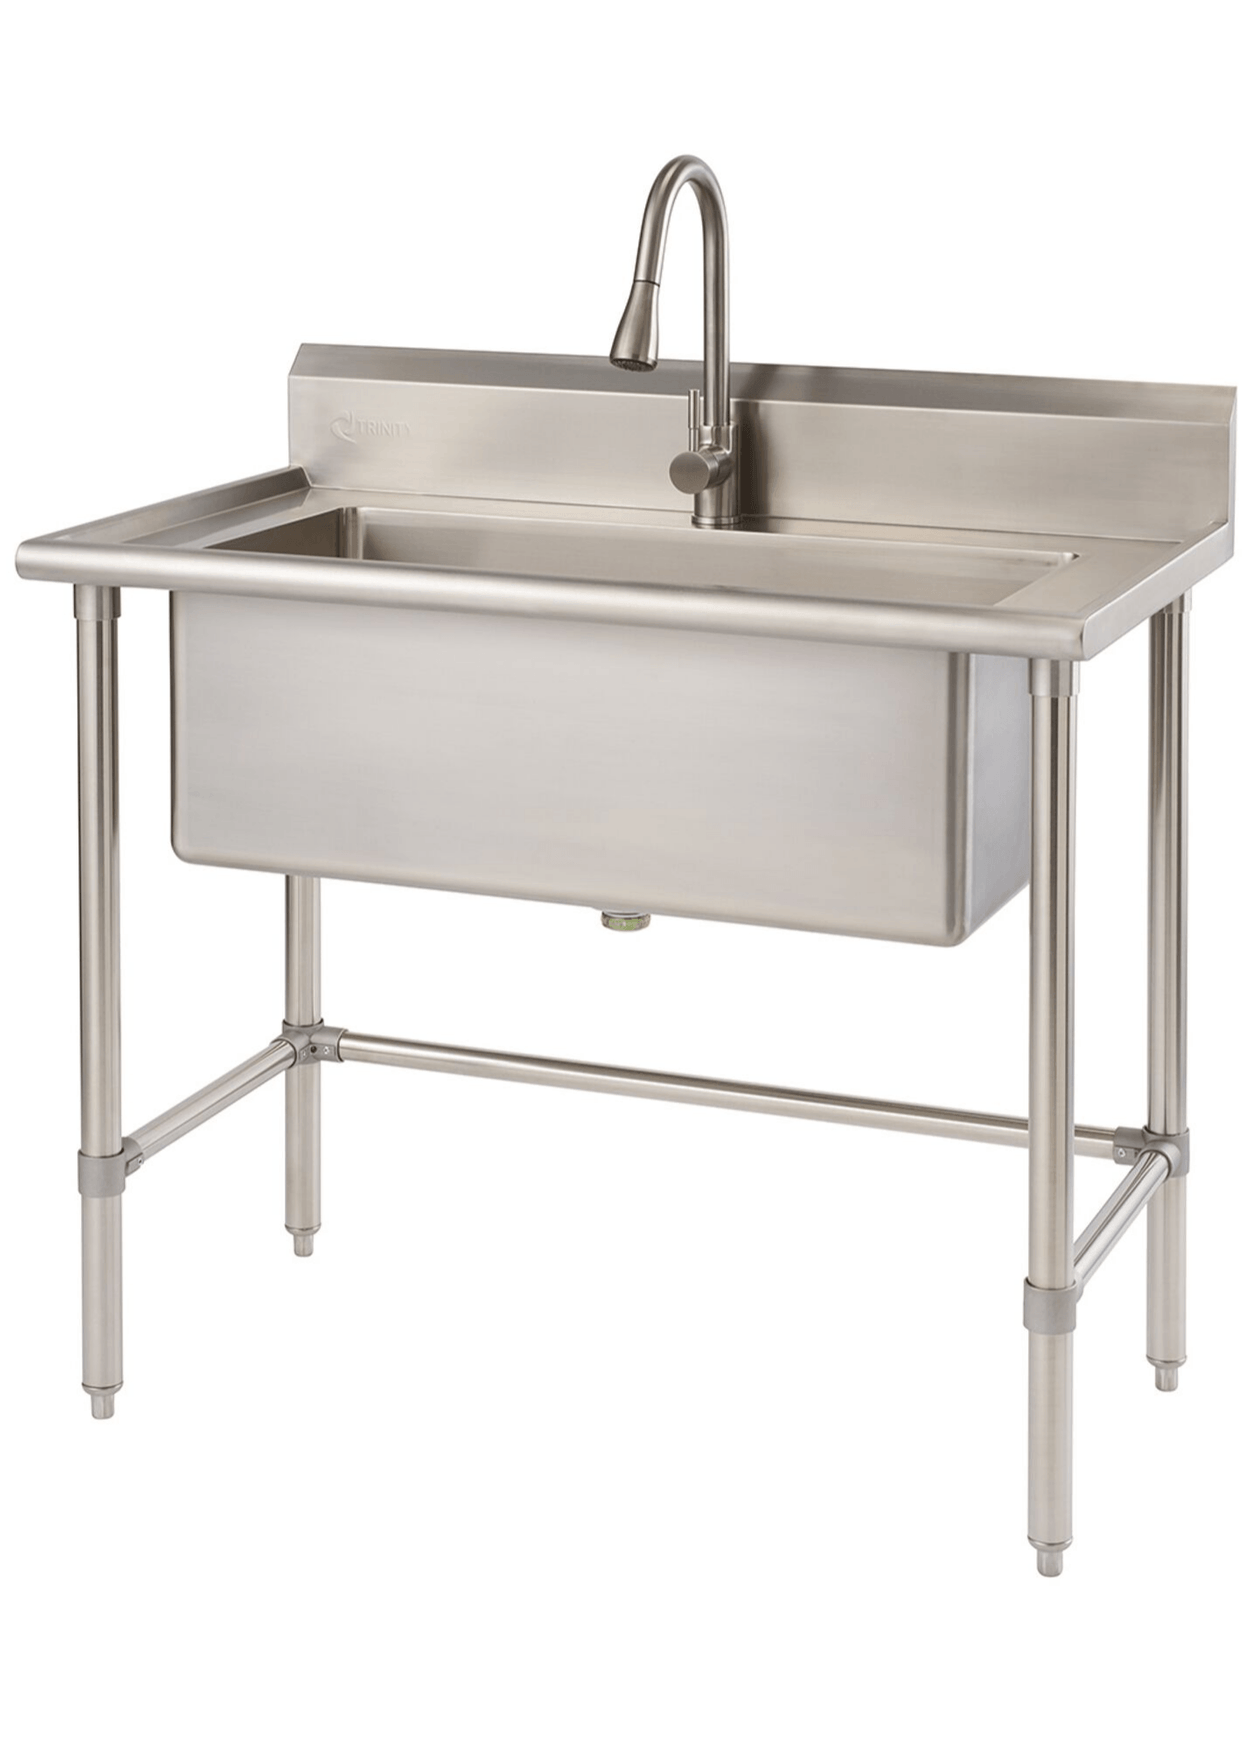 [View 26+] Trinity Stainless Steel Utility Sink With Faucet Costco Stainless Steel Laundry Sink Costco